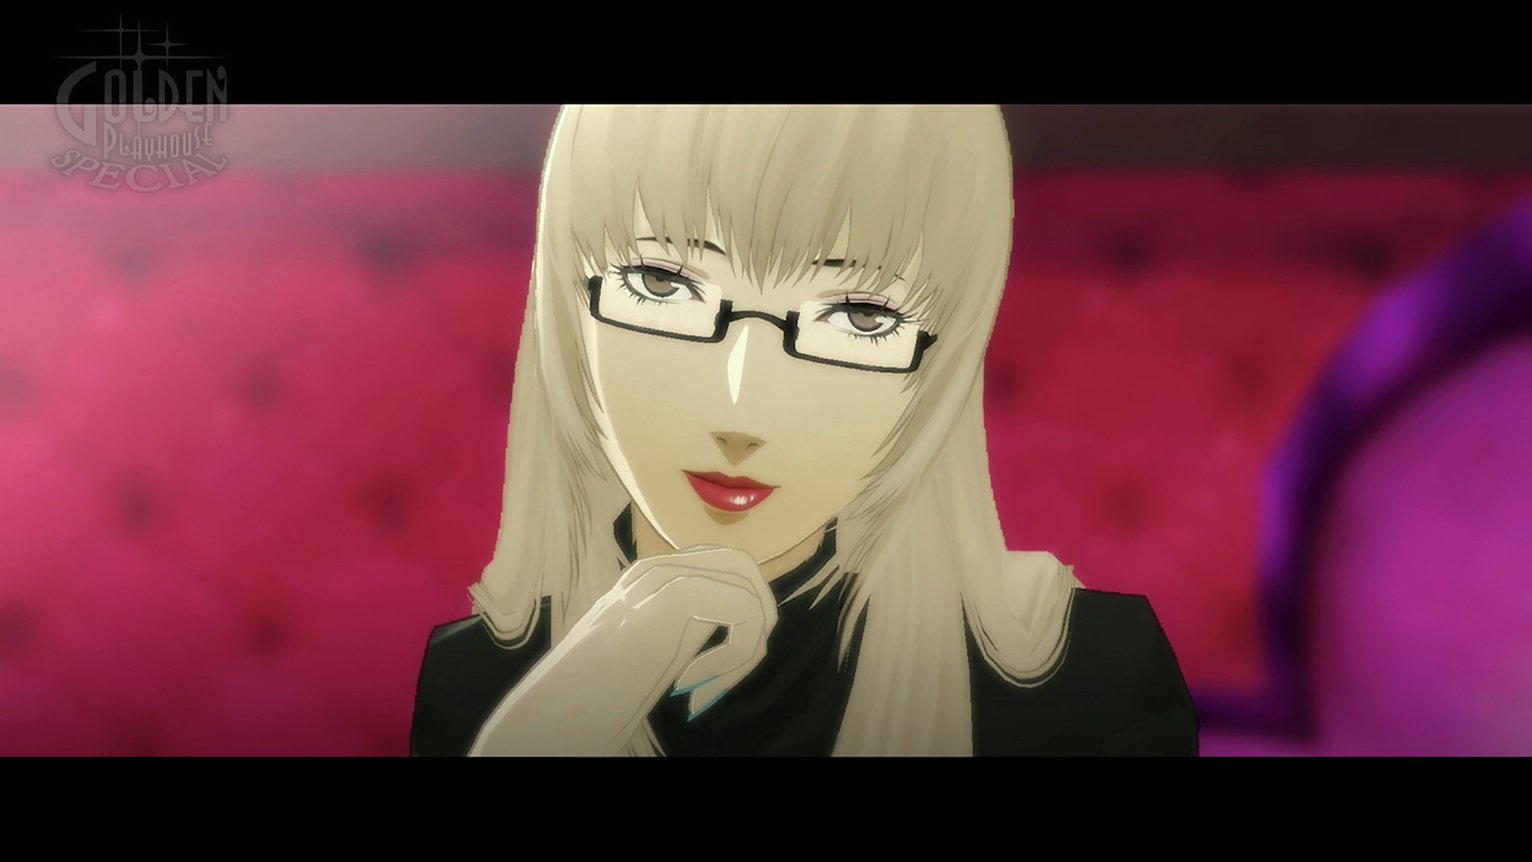 Catherine Full Body Nintendo Switch Game Review